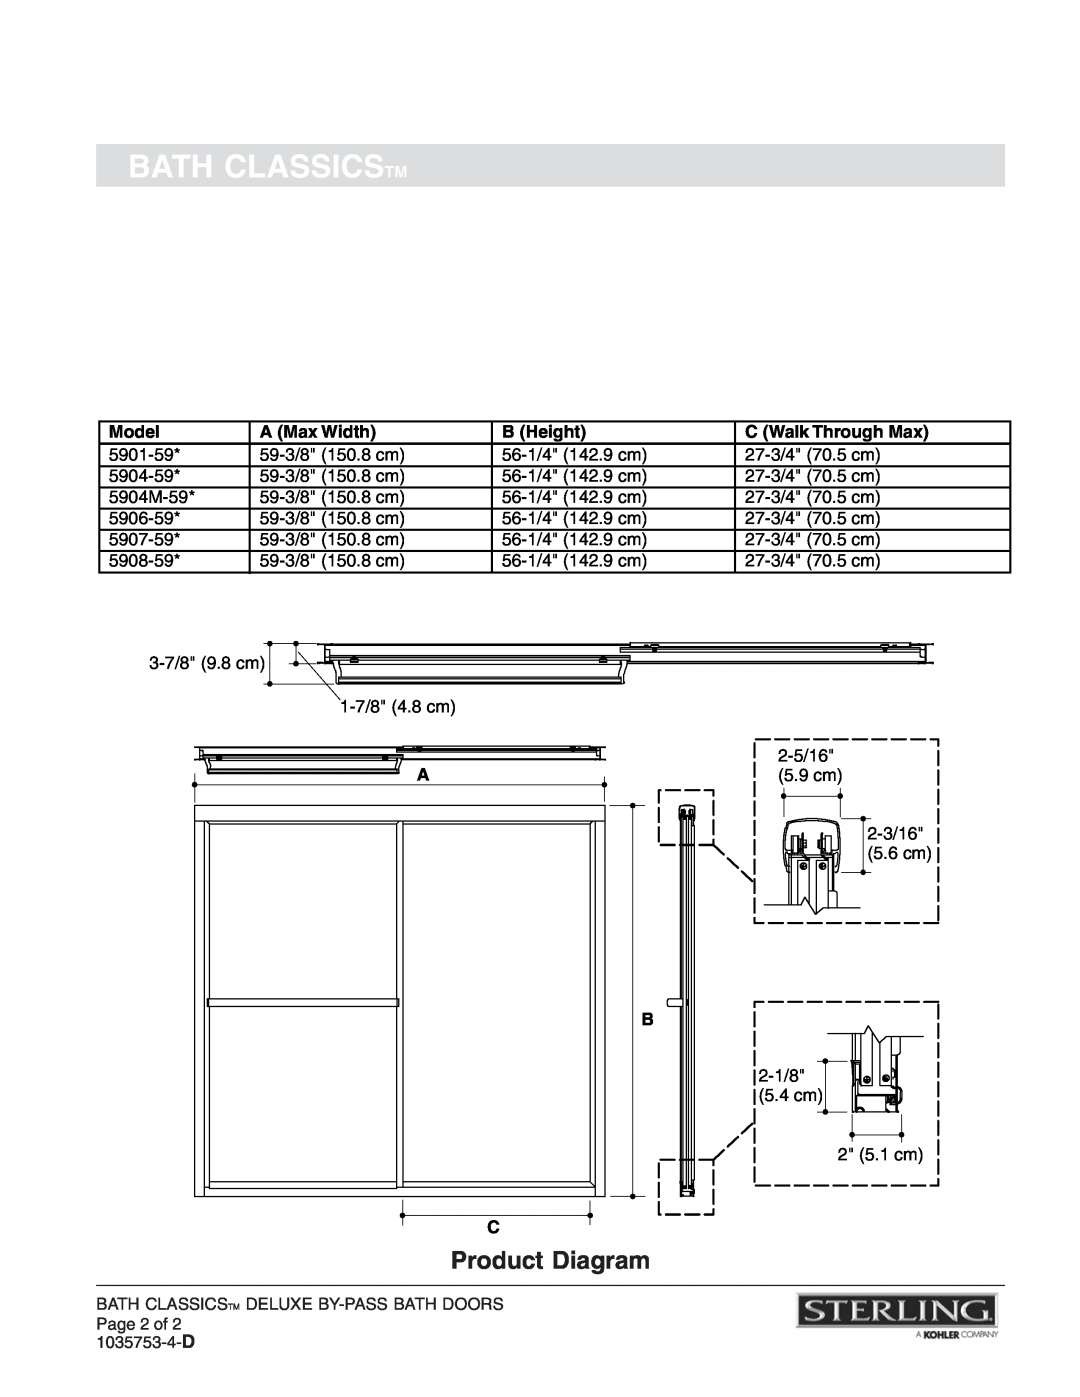 Sterling Plumbing 5908-59*-G04 Product Diagram, Bath Classicstm, Model, A Max Width, B Height, C Walk Through Max 